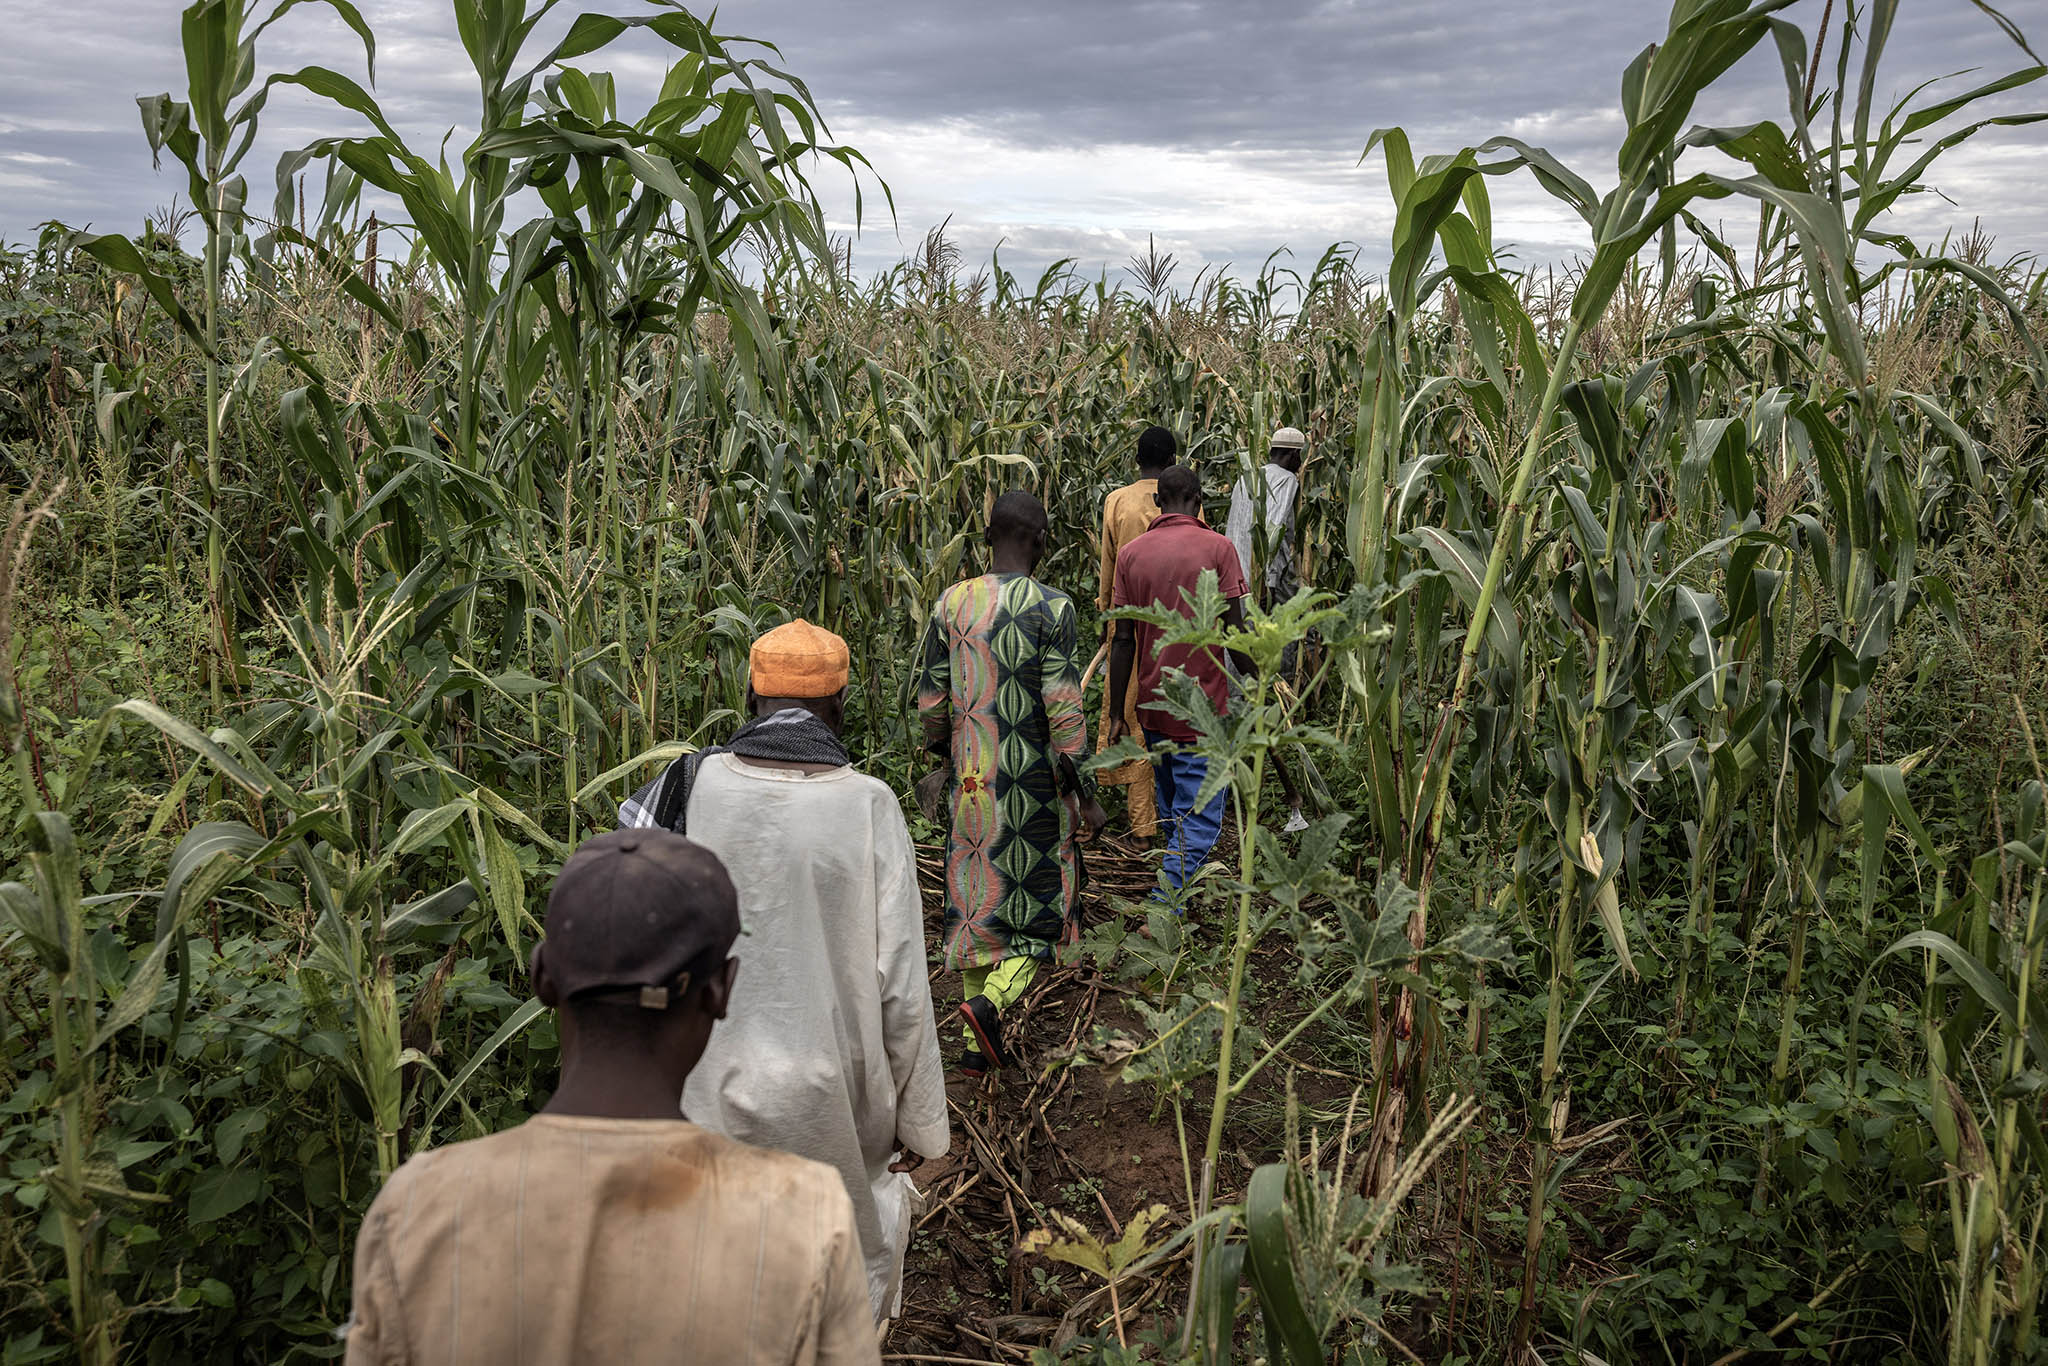 Farmers in Nigeria’s Gombe state head to work. Inflation has many families skipping meals as Nigeria struggles to restore economic growth, internal security and trust in government, all vital to domestic stability. (Finbarr O’Reilly/The New York Times)